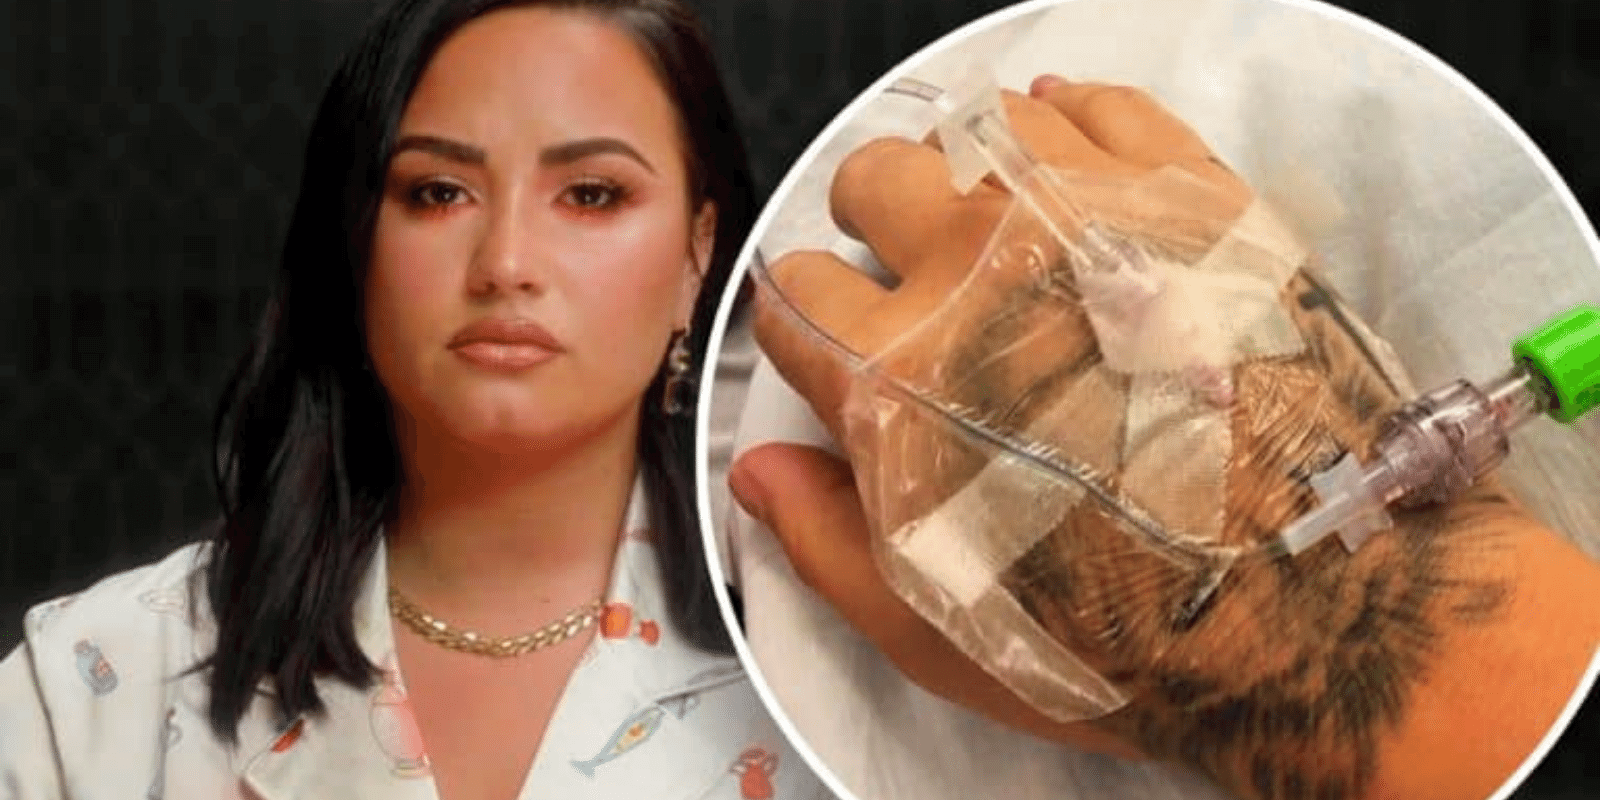 Demi recalls waking up in the hospital and coming to terms with her overdose.